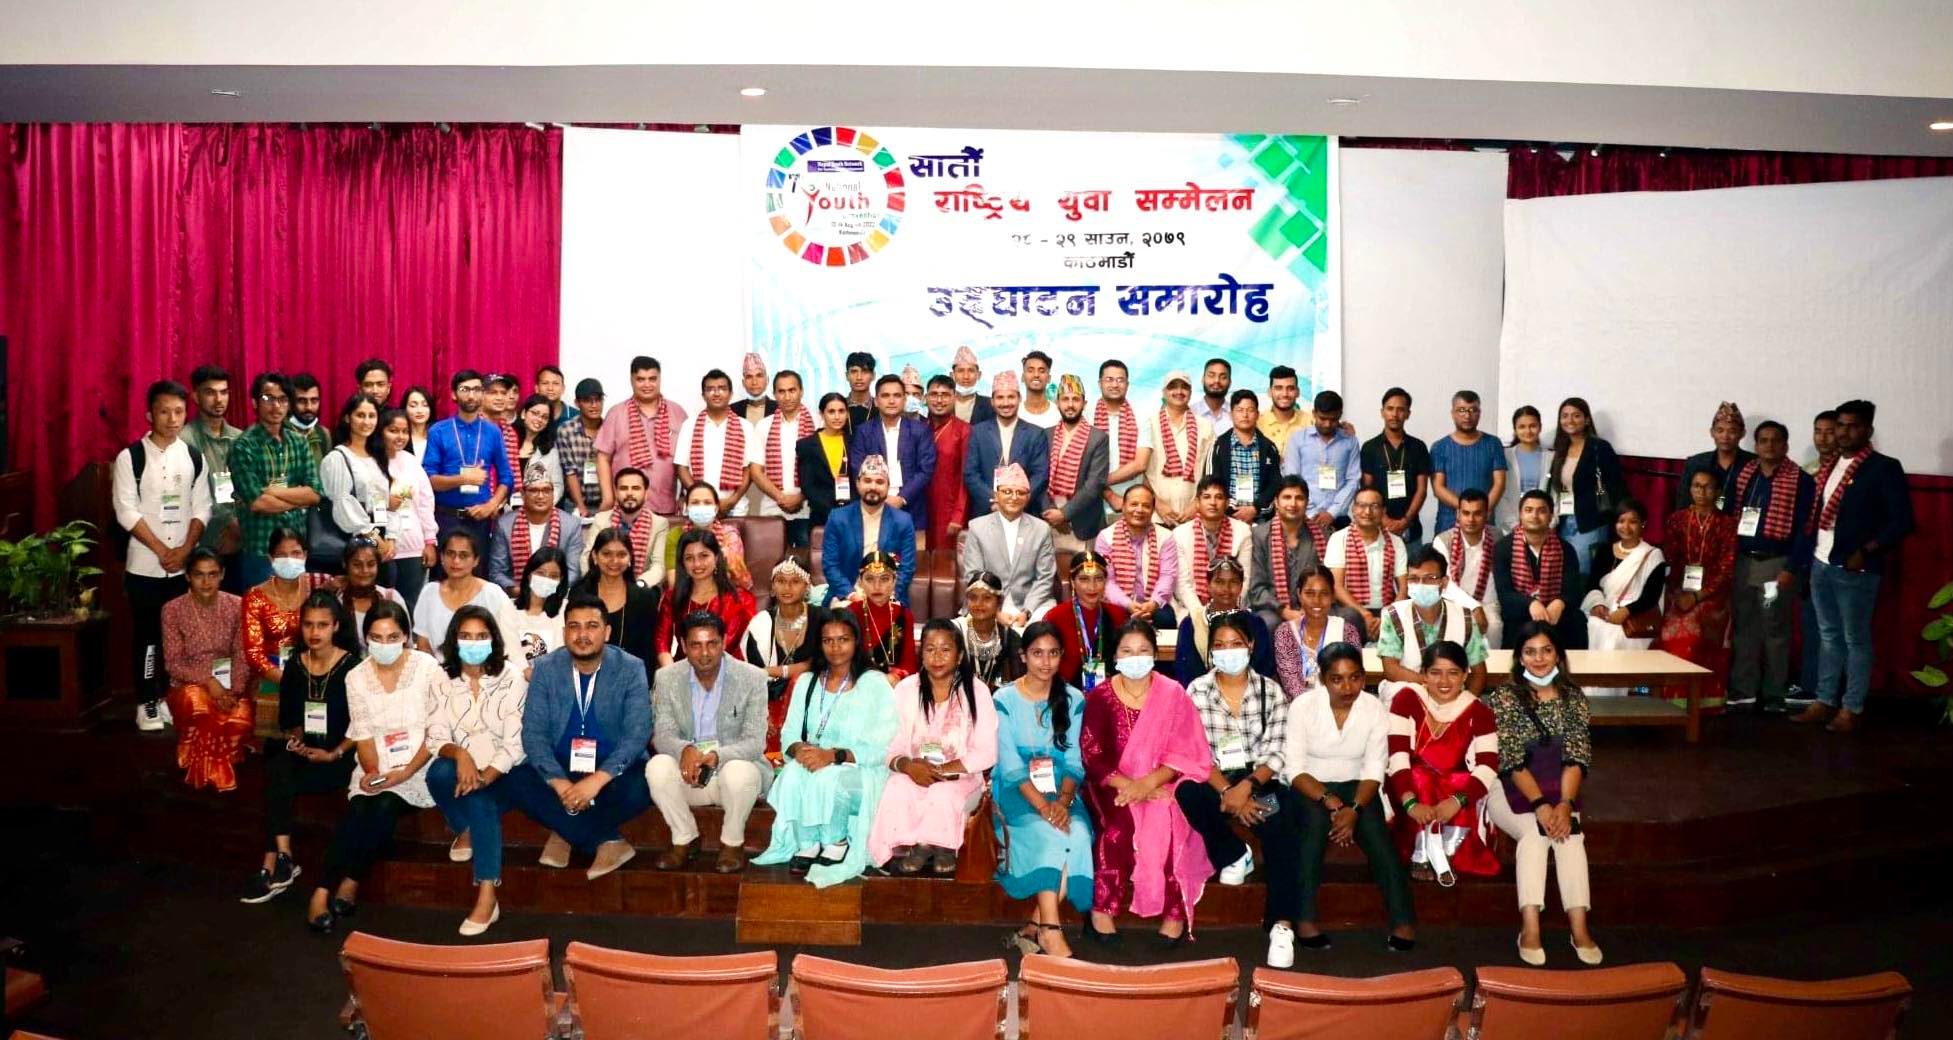 7th National Youth Conference